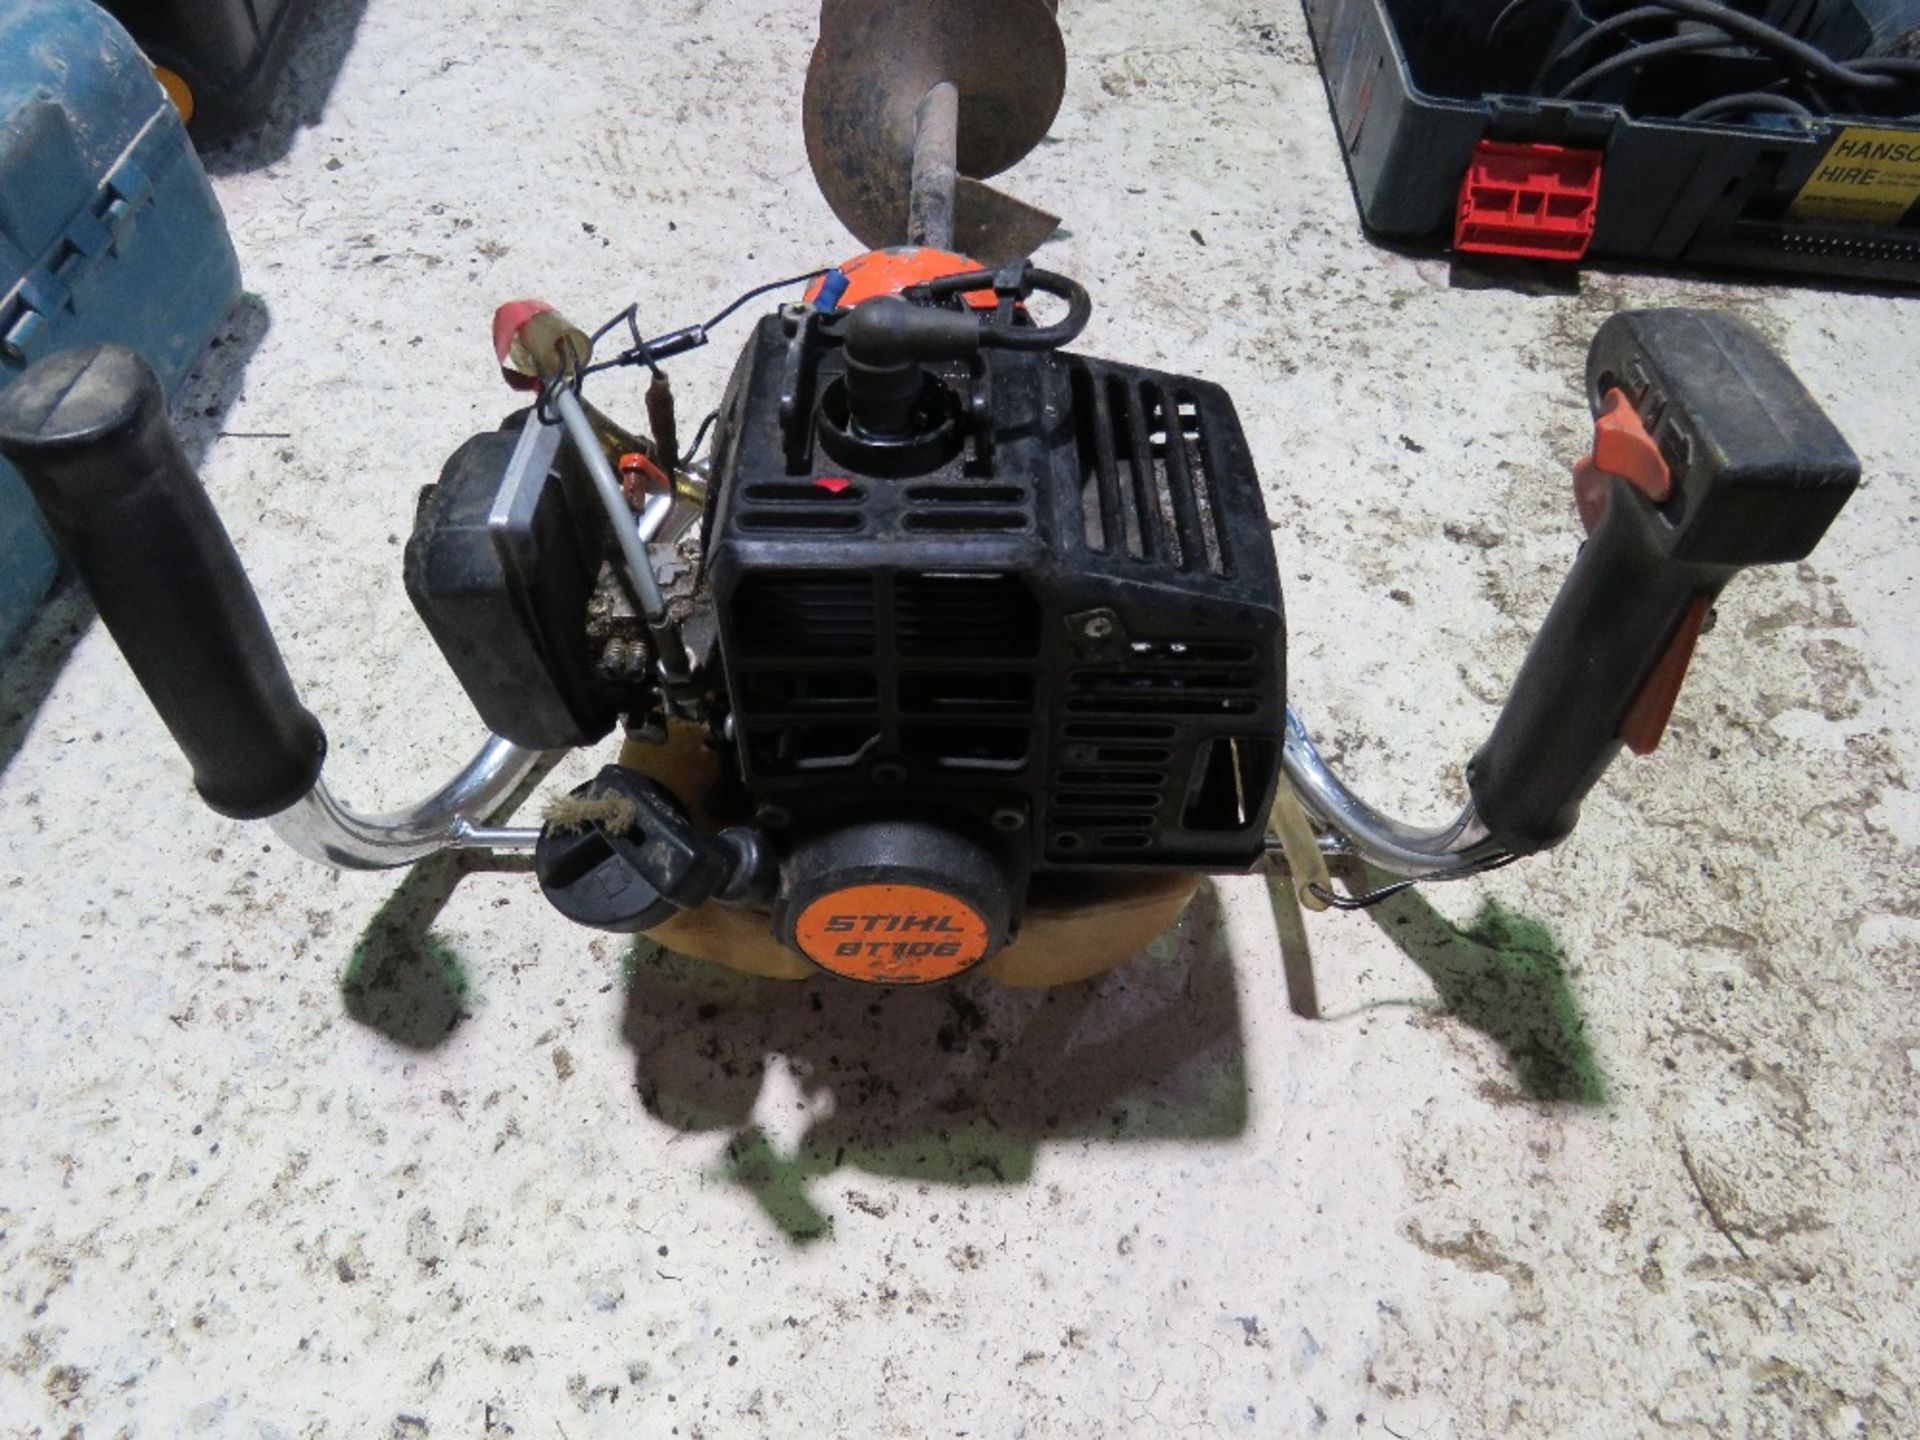 STIHL PETROL ENGINED POST HOLE BORER. SOURCED FROM LOCAL DEPOT CLOSURE. - Image 4 of 6